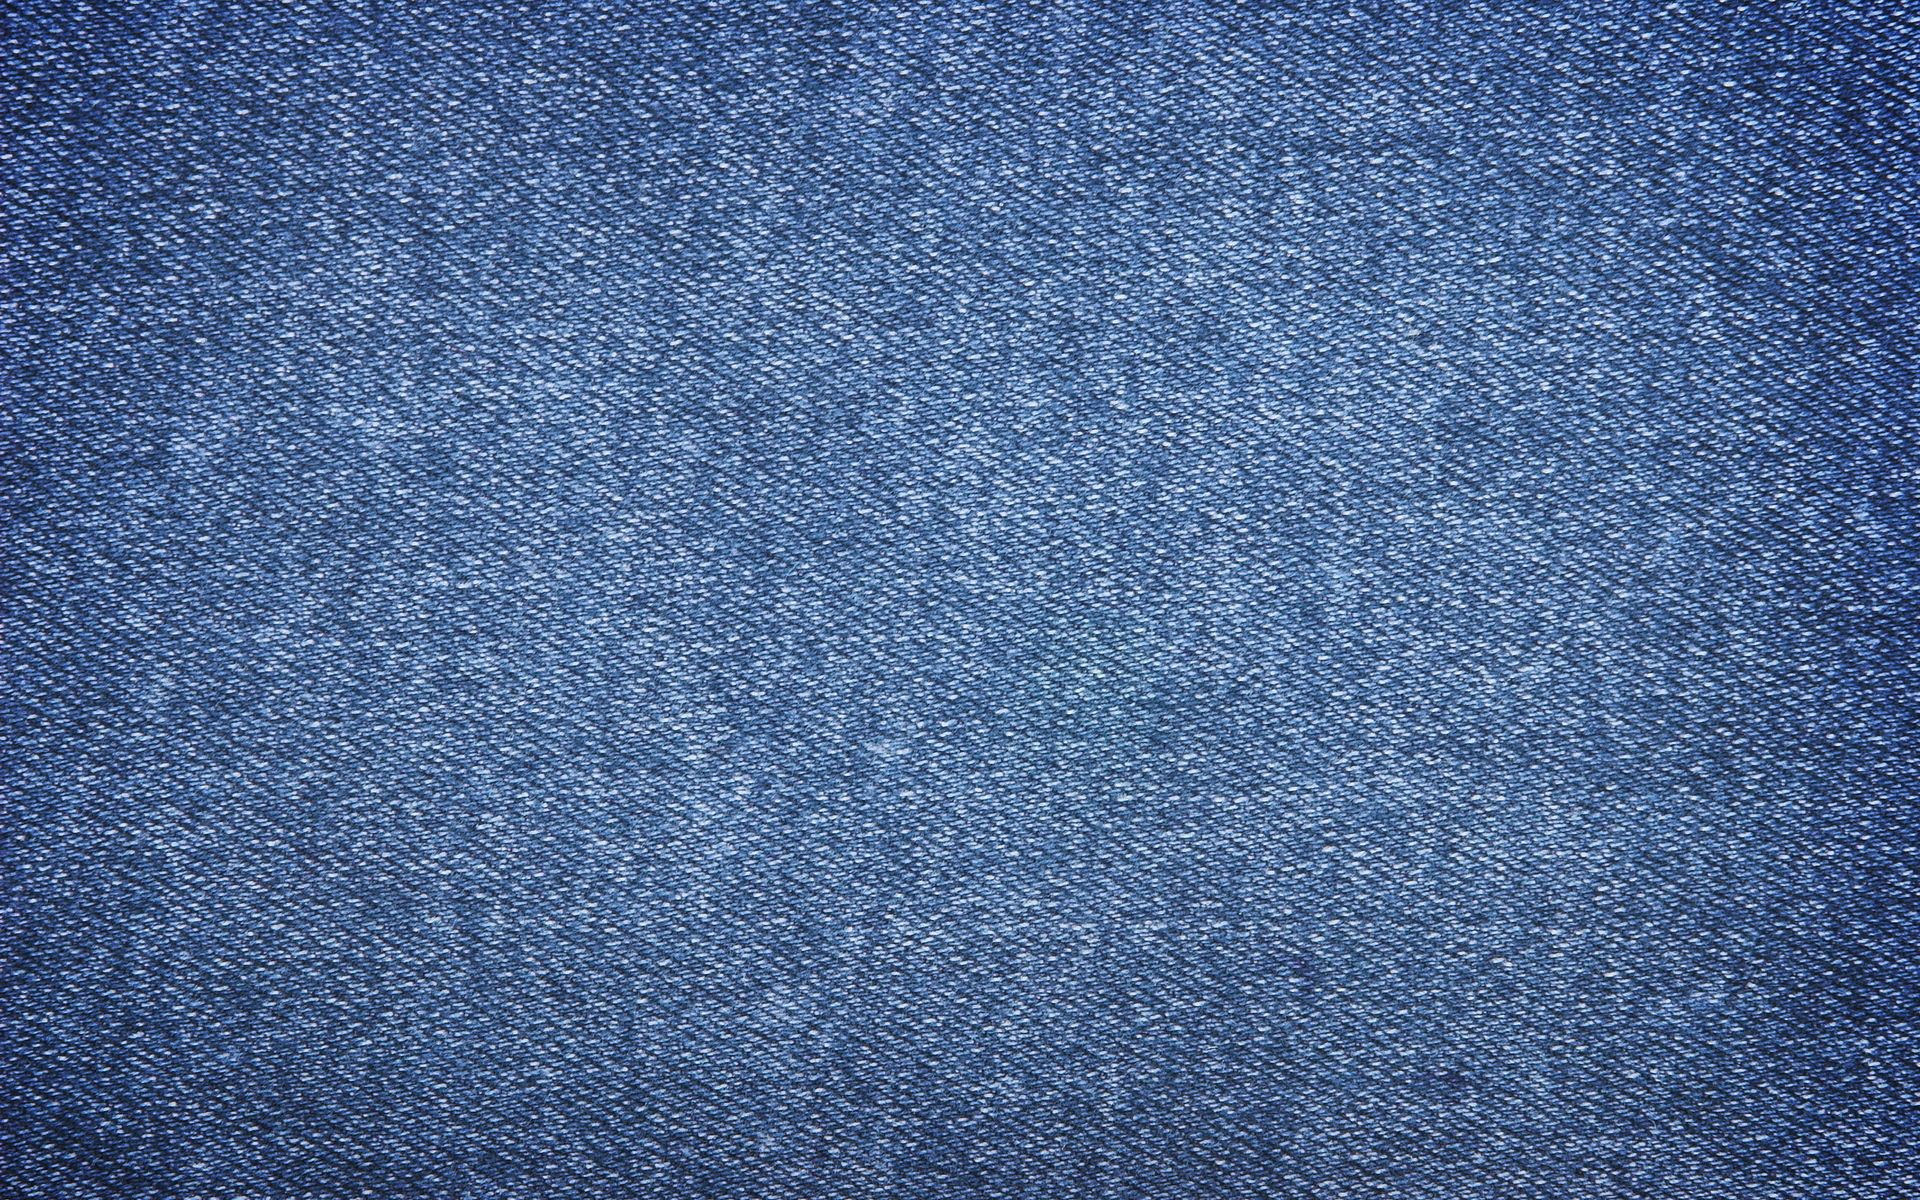 textures, texture, background, surface, jeans